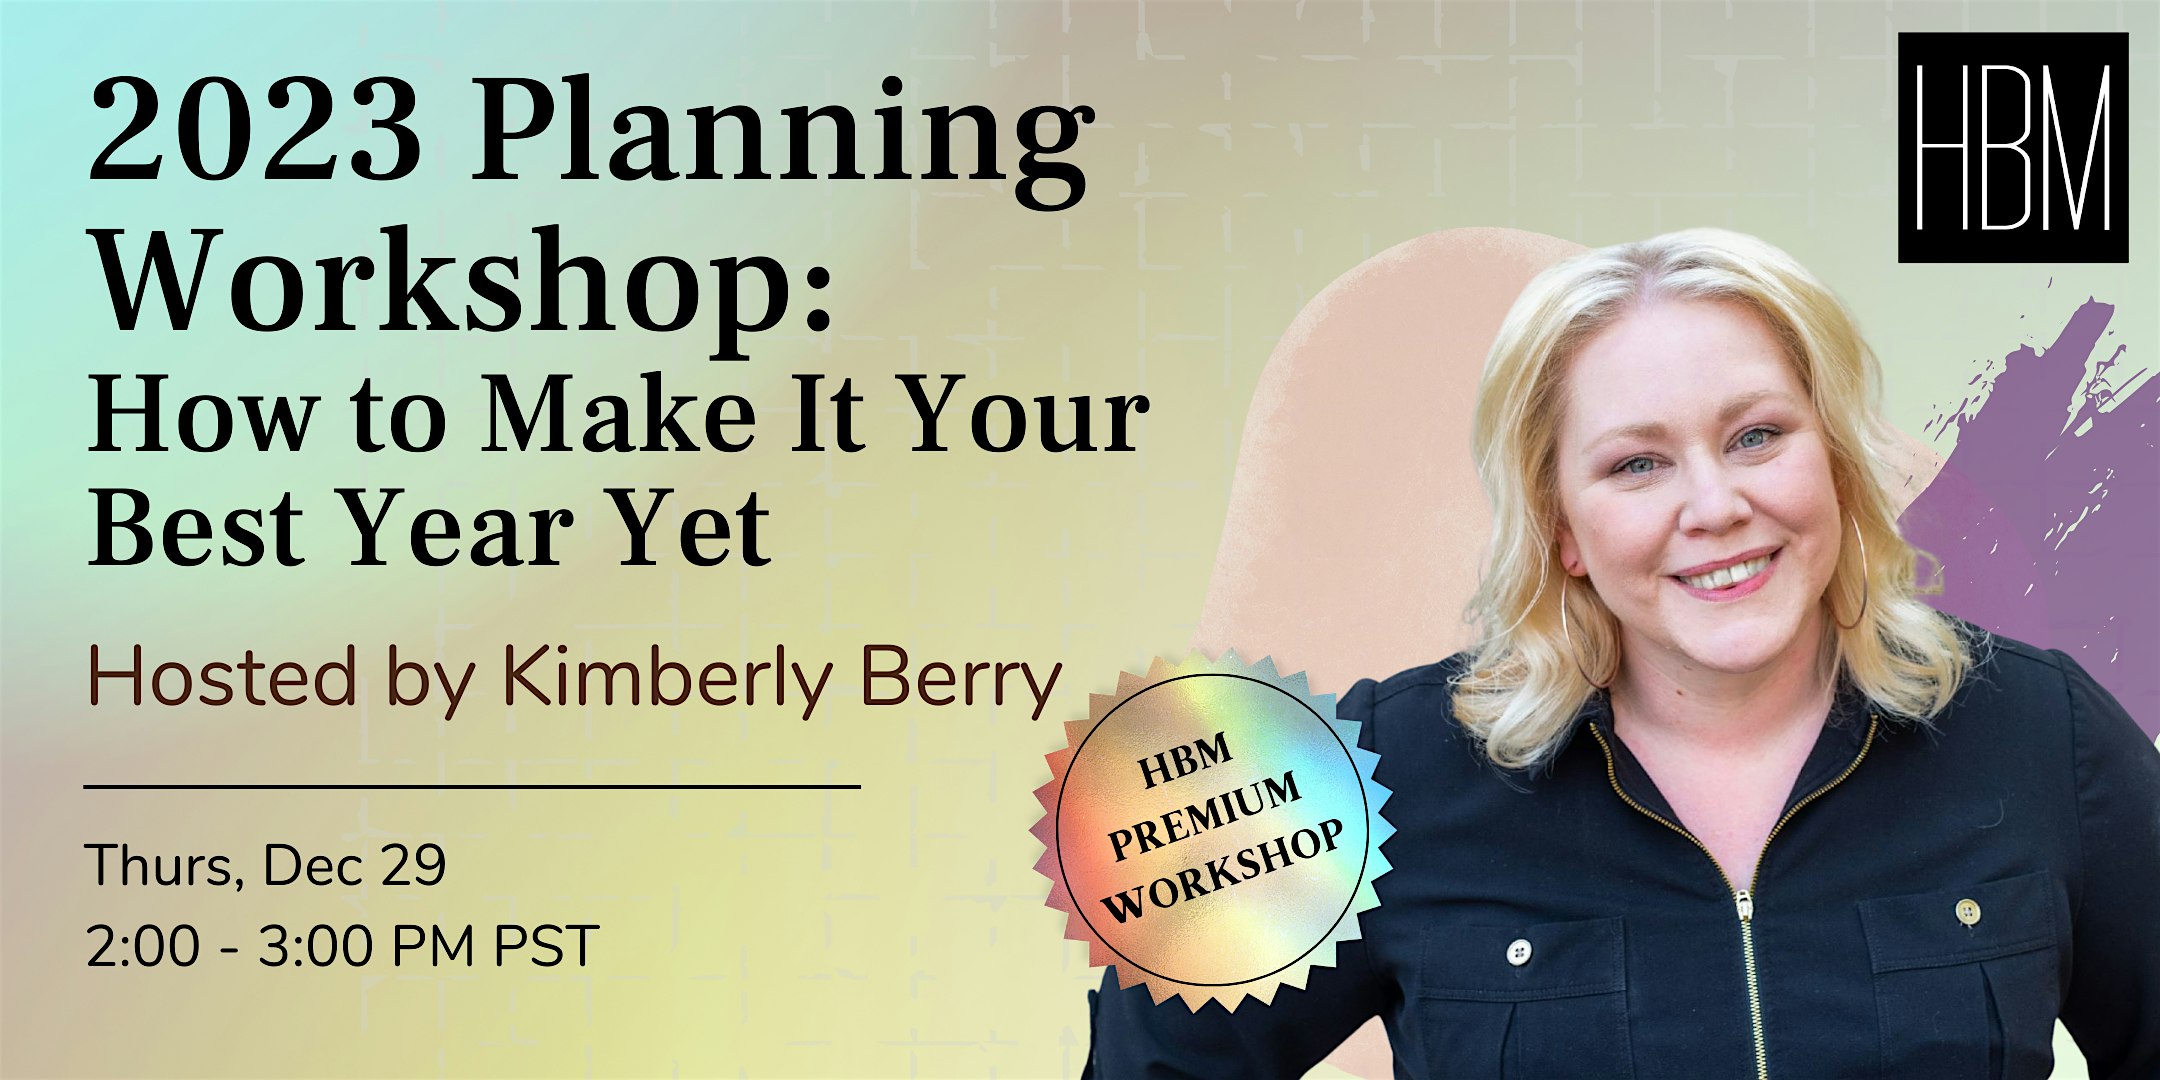 2023 Planning Workshop: How to Make It Your Best Year Yet